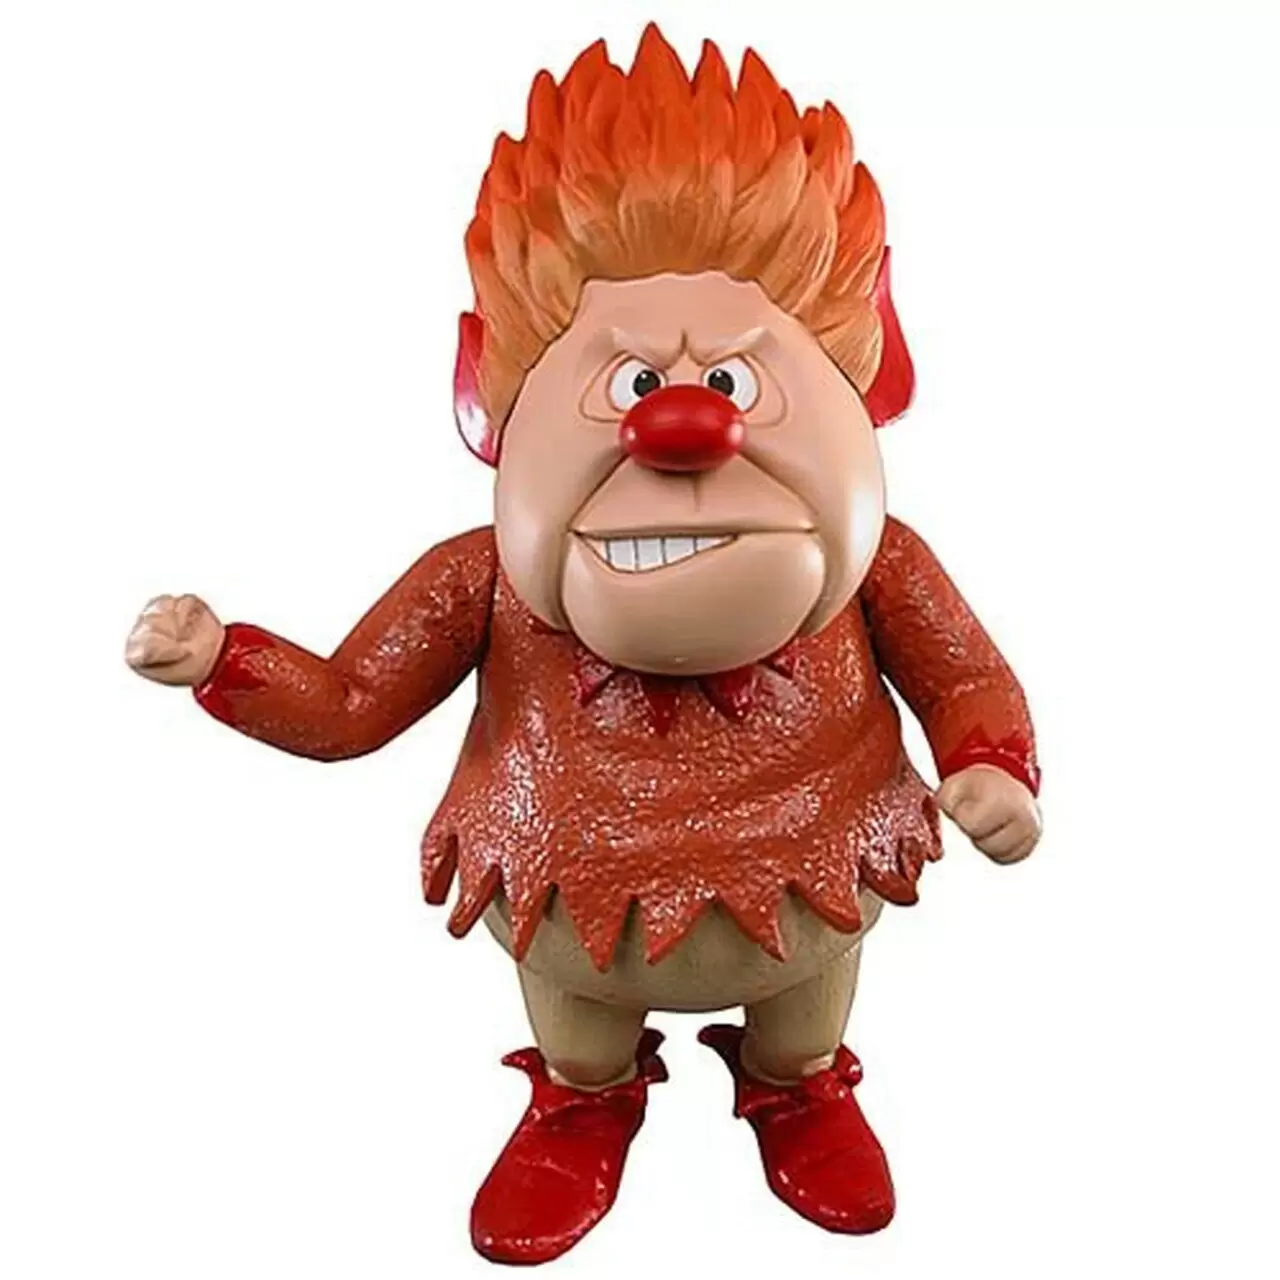 NECA - The year without a Santa Claus - Heat Miser